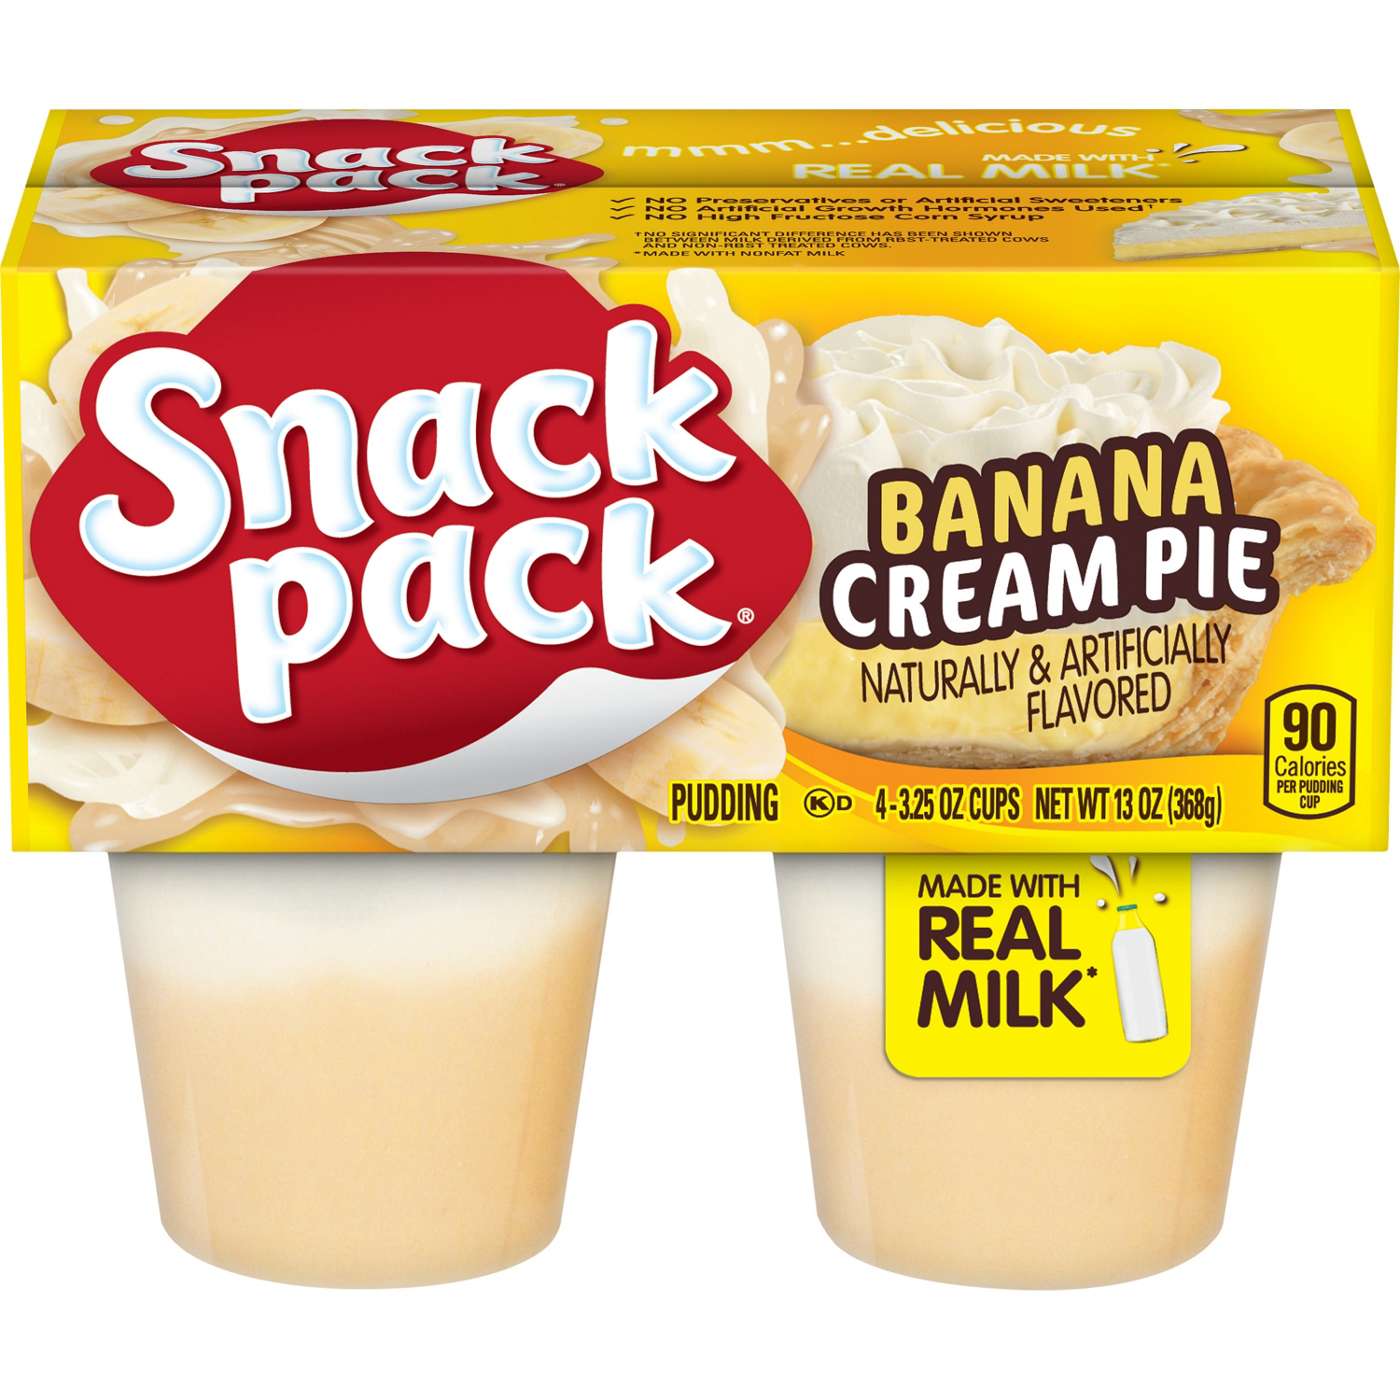 Snack Pack Banana Cream Pie Pudding Cups; image 1 of 7